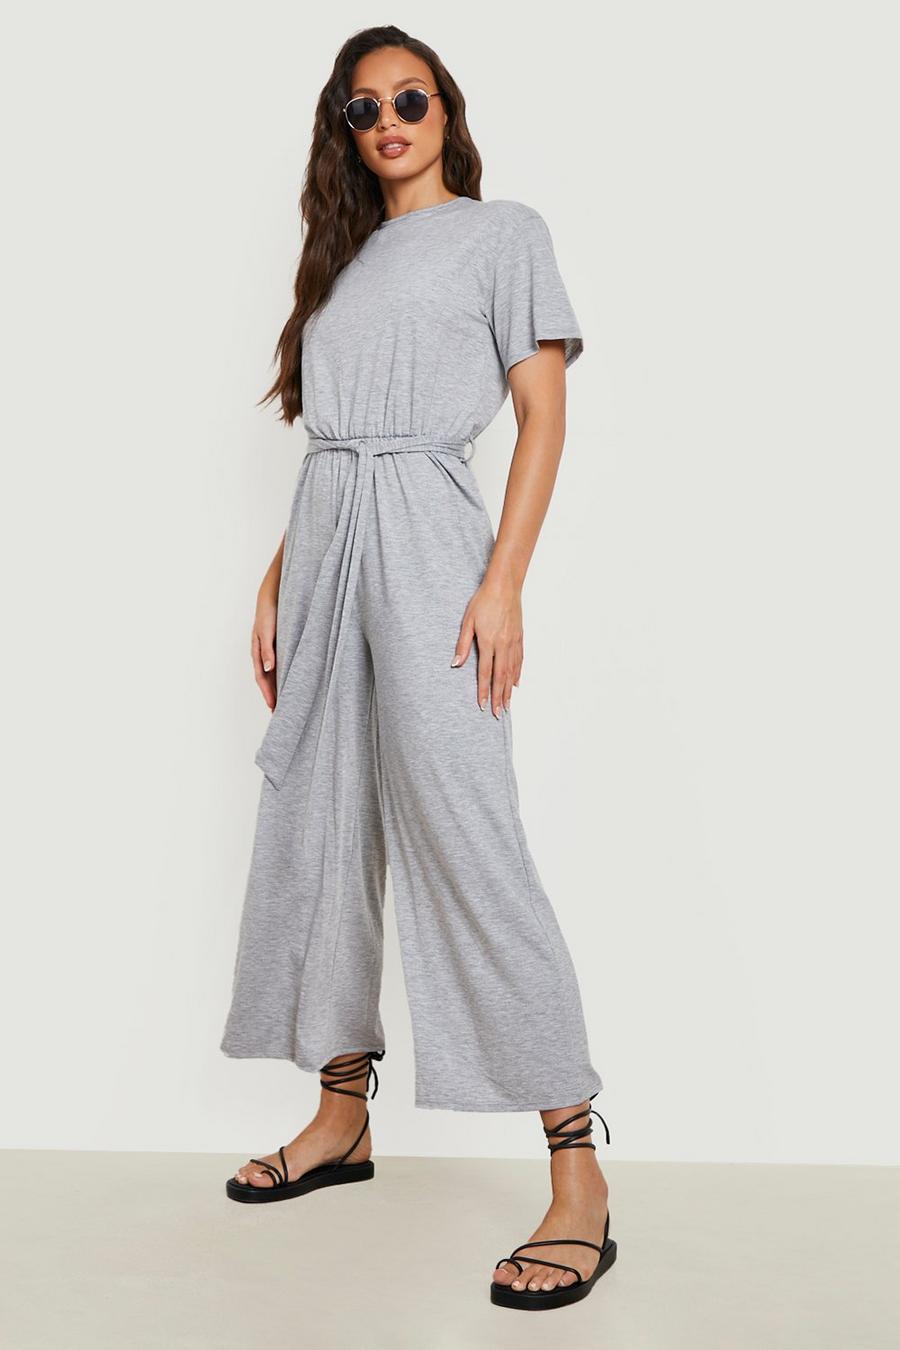 Grey marl Tall Jersey Culottes Jumpsuit image number 1